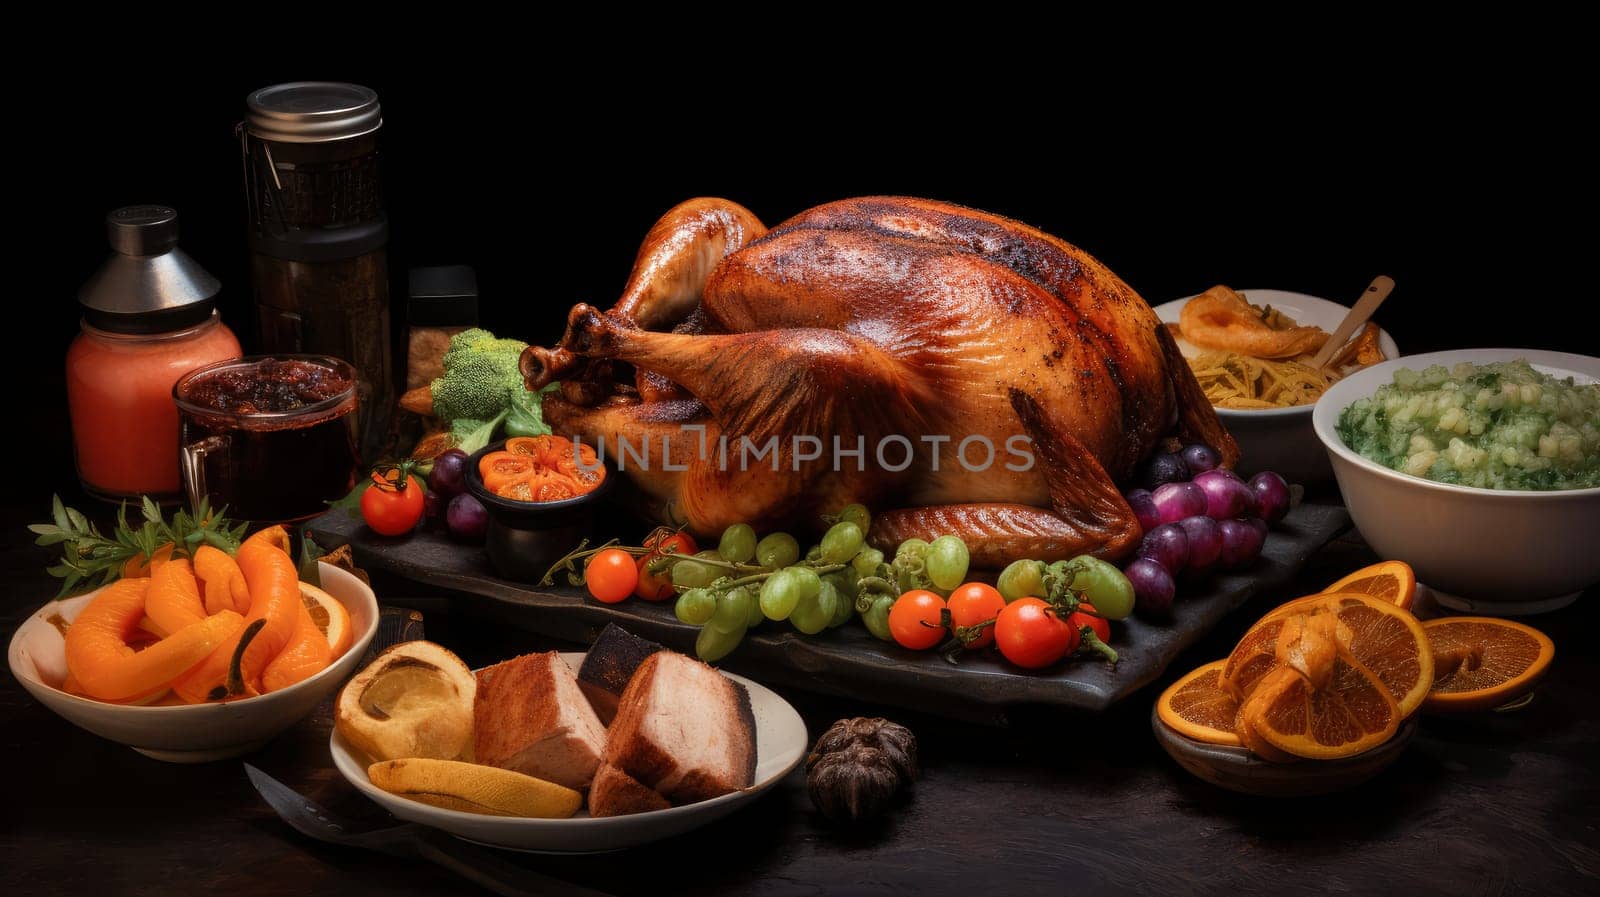 Baked turkey and other Thanksgiving foods. by palinchak